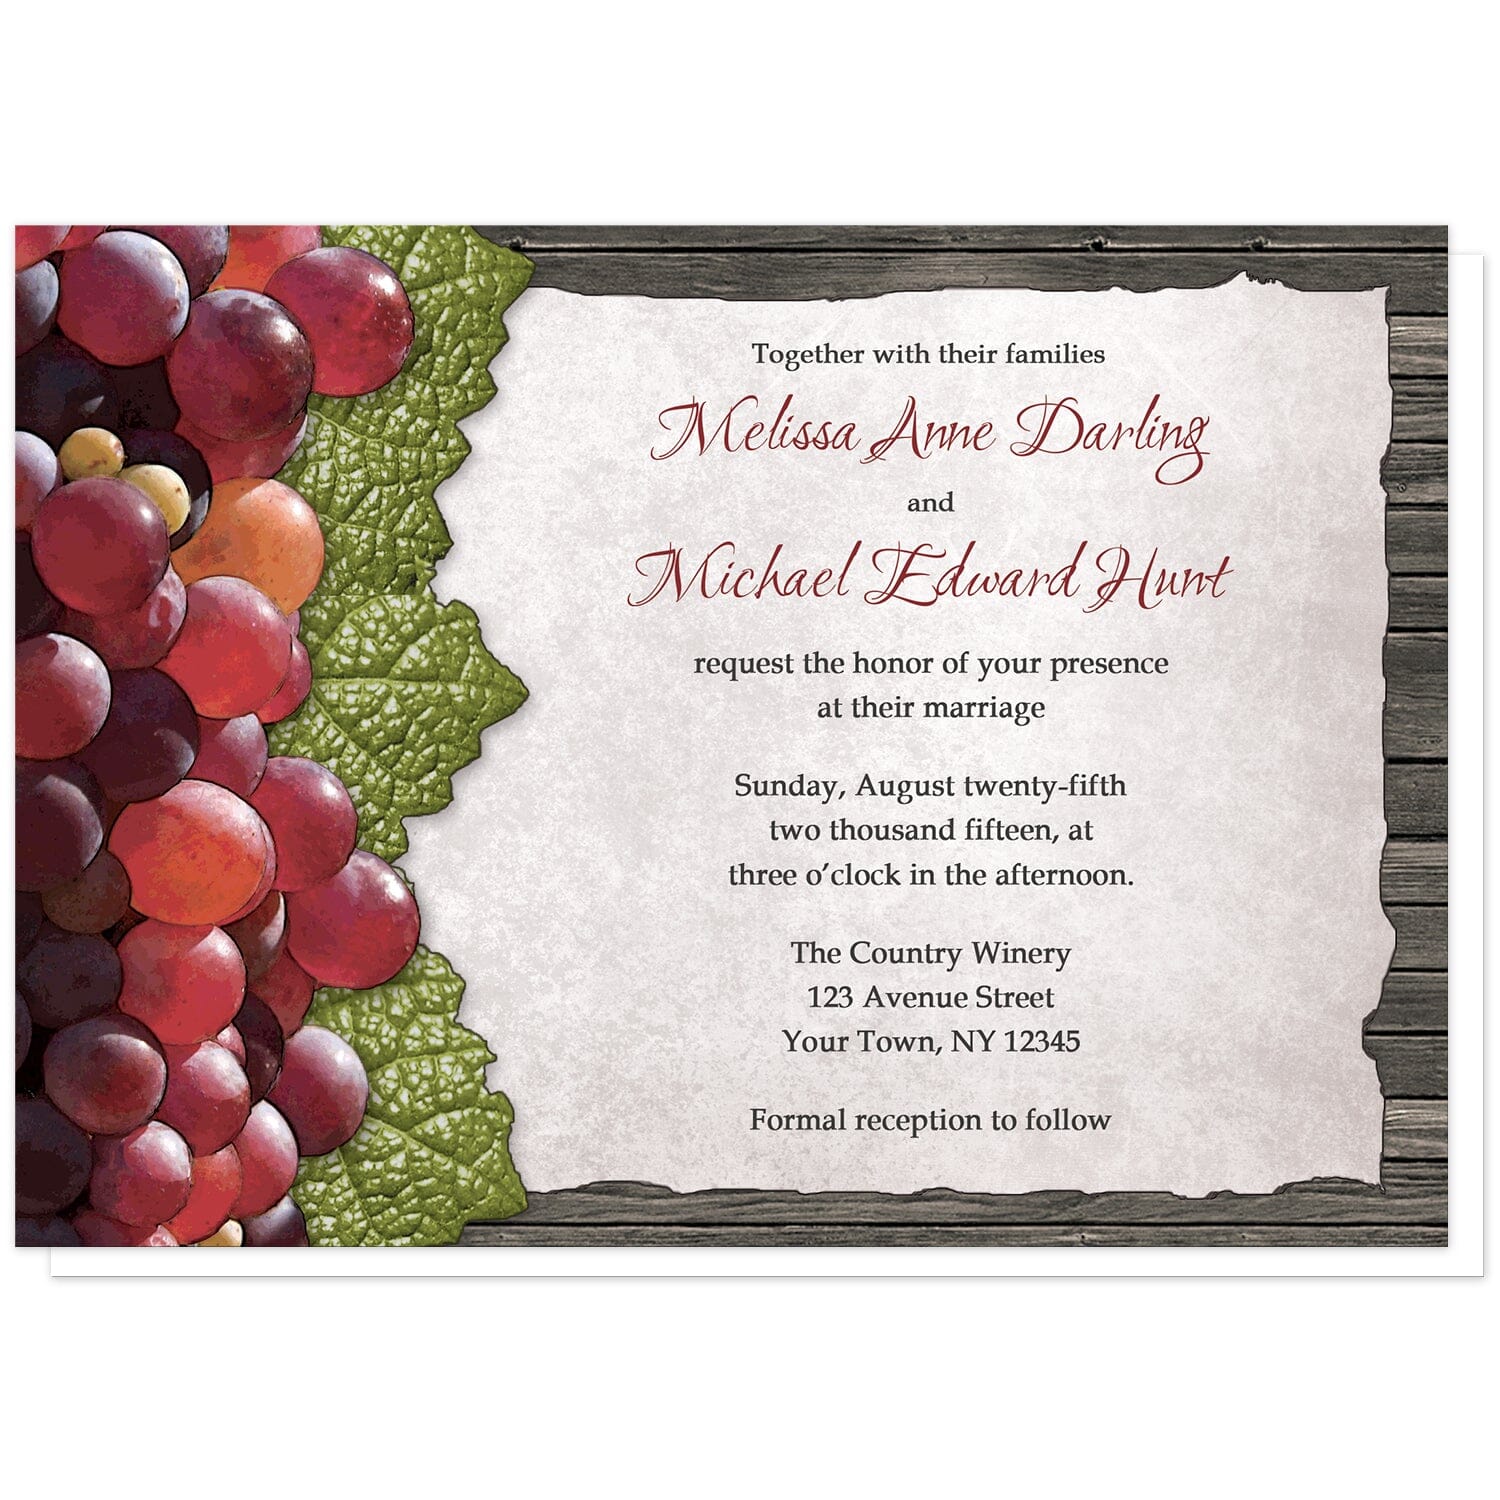 Rustic Winery Grapes and Wood Wedding Invitations at Artistically Invited. Rustic winery grapes and wood wedding invitations designed with rustic red grapes and green leaves along the left side. Your personalized marriage celebration details are custom printed in dark red and brown on a torn parchment paper design over dark brown wood. 